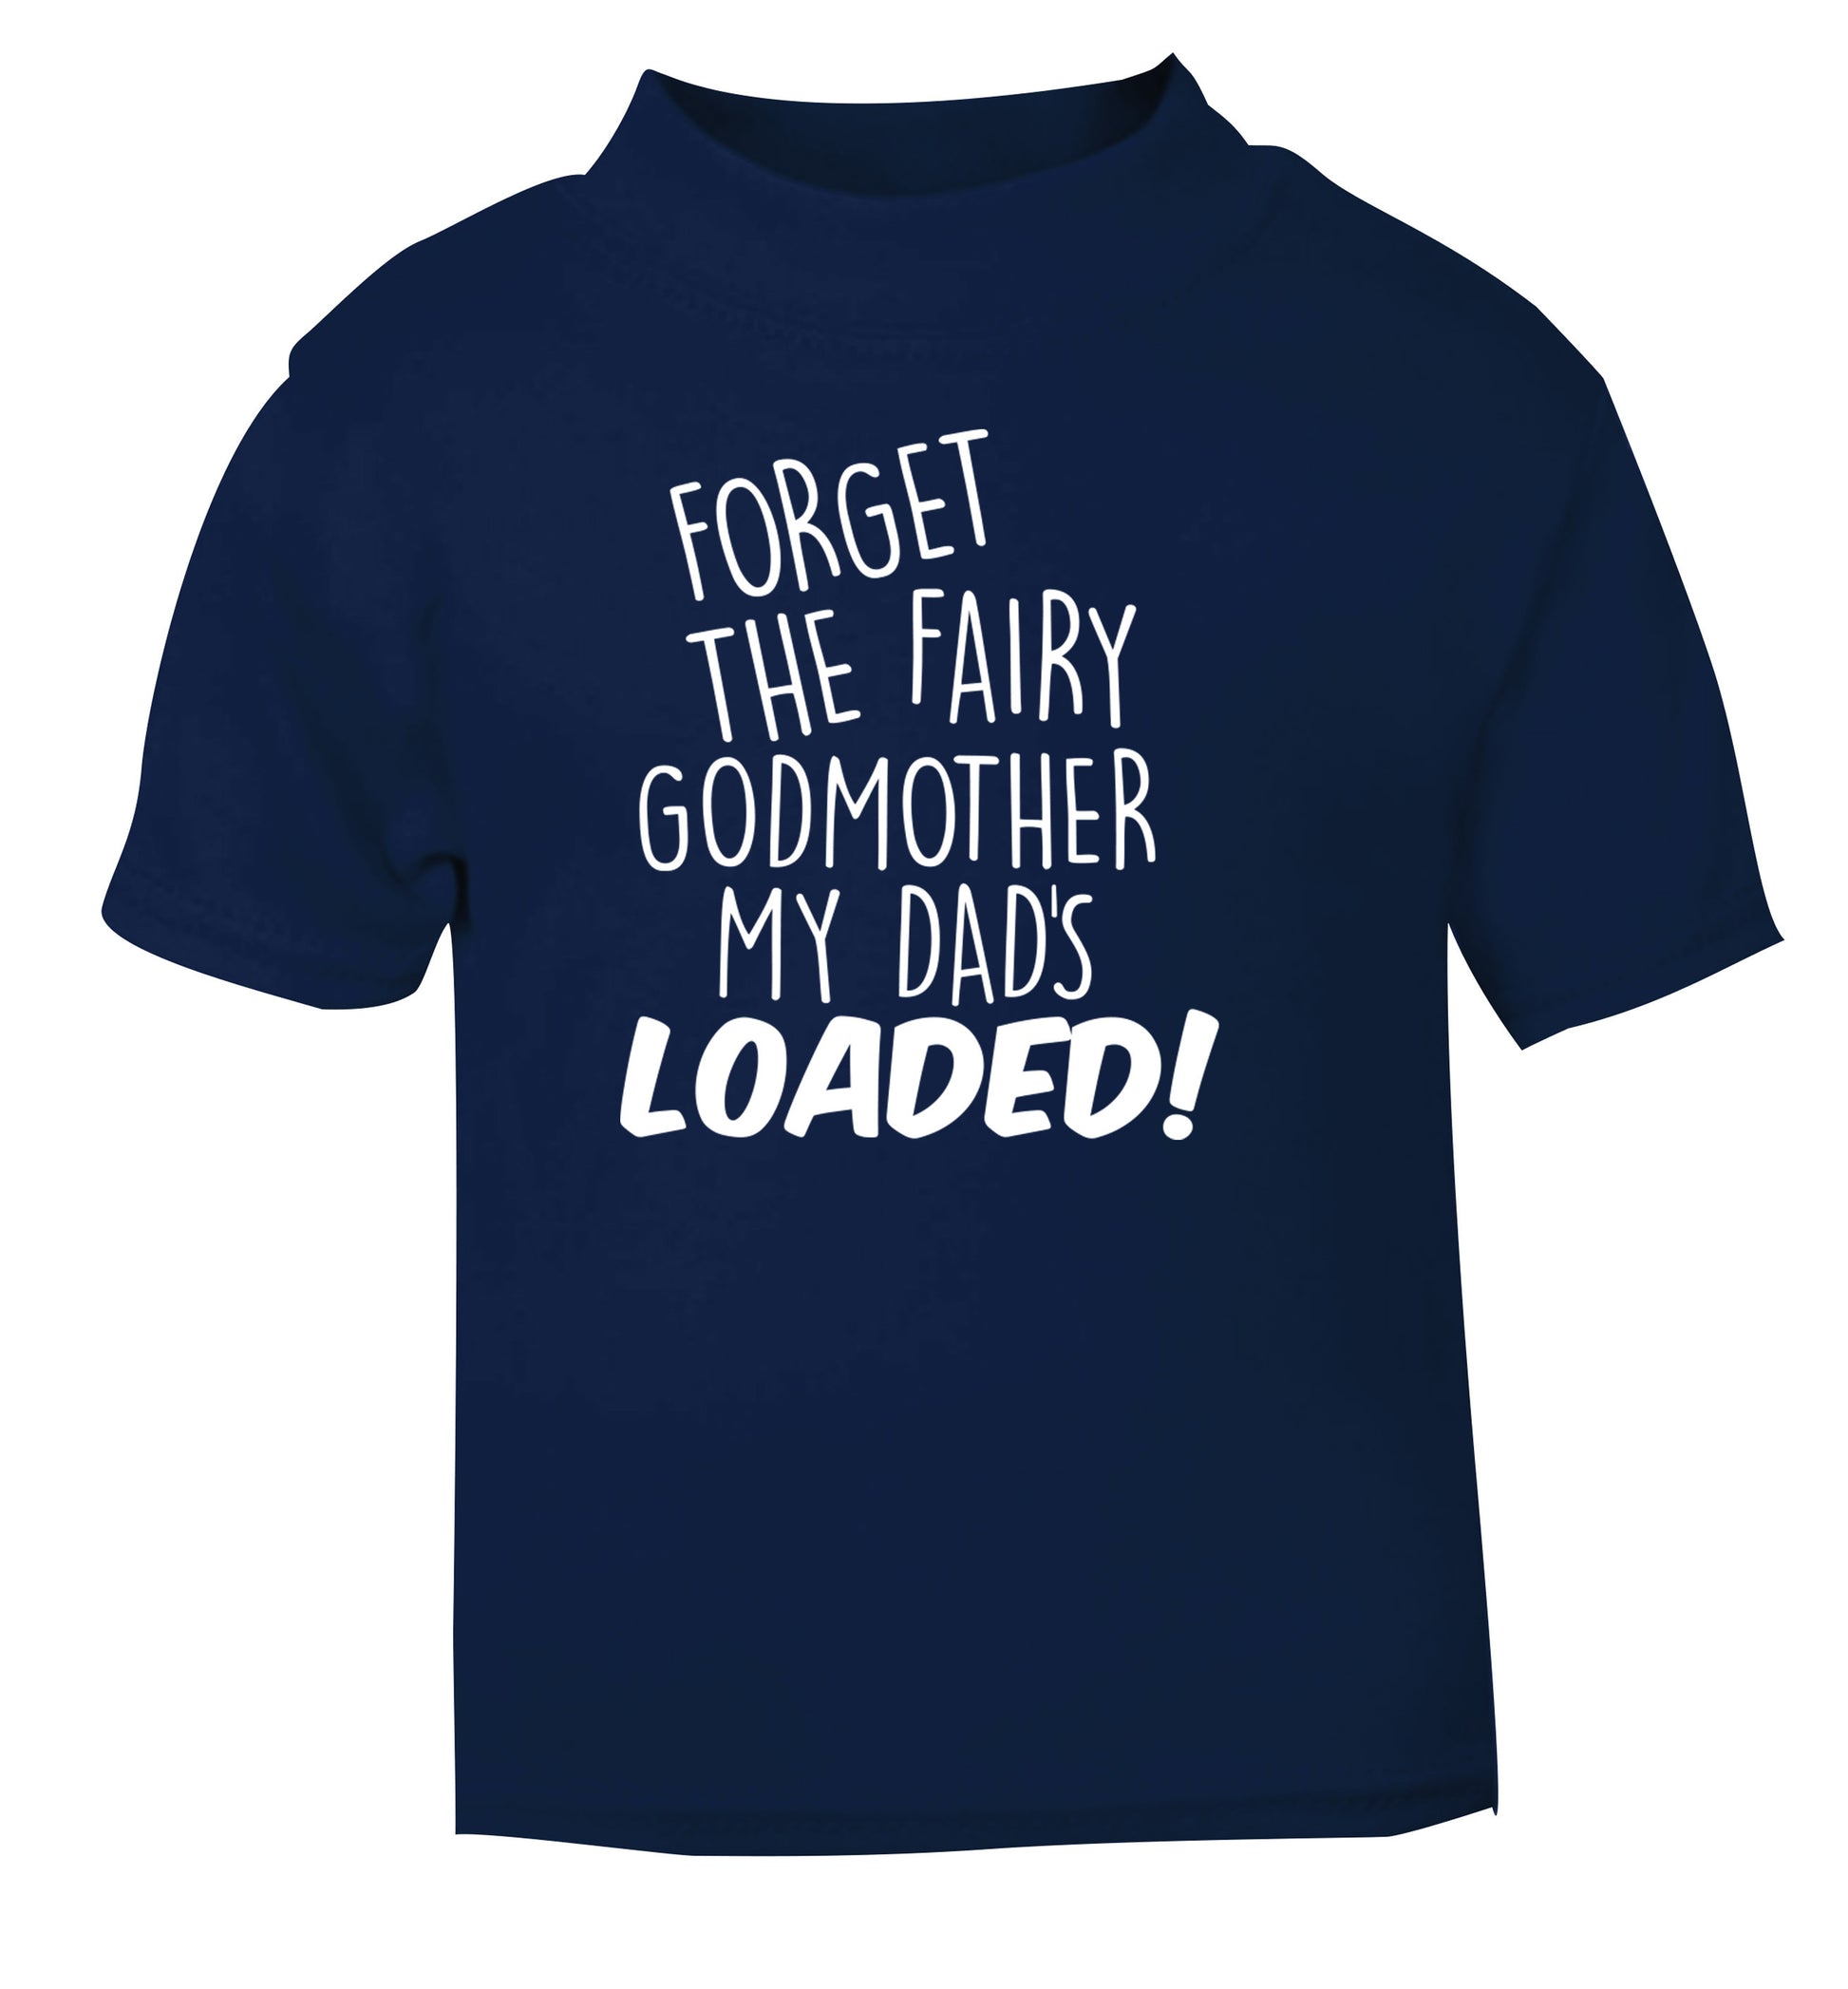 Forget the fairy godmother my dad's loaded navy Baby Toddler Tshirt 2 Years